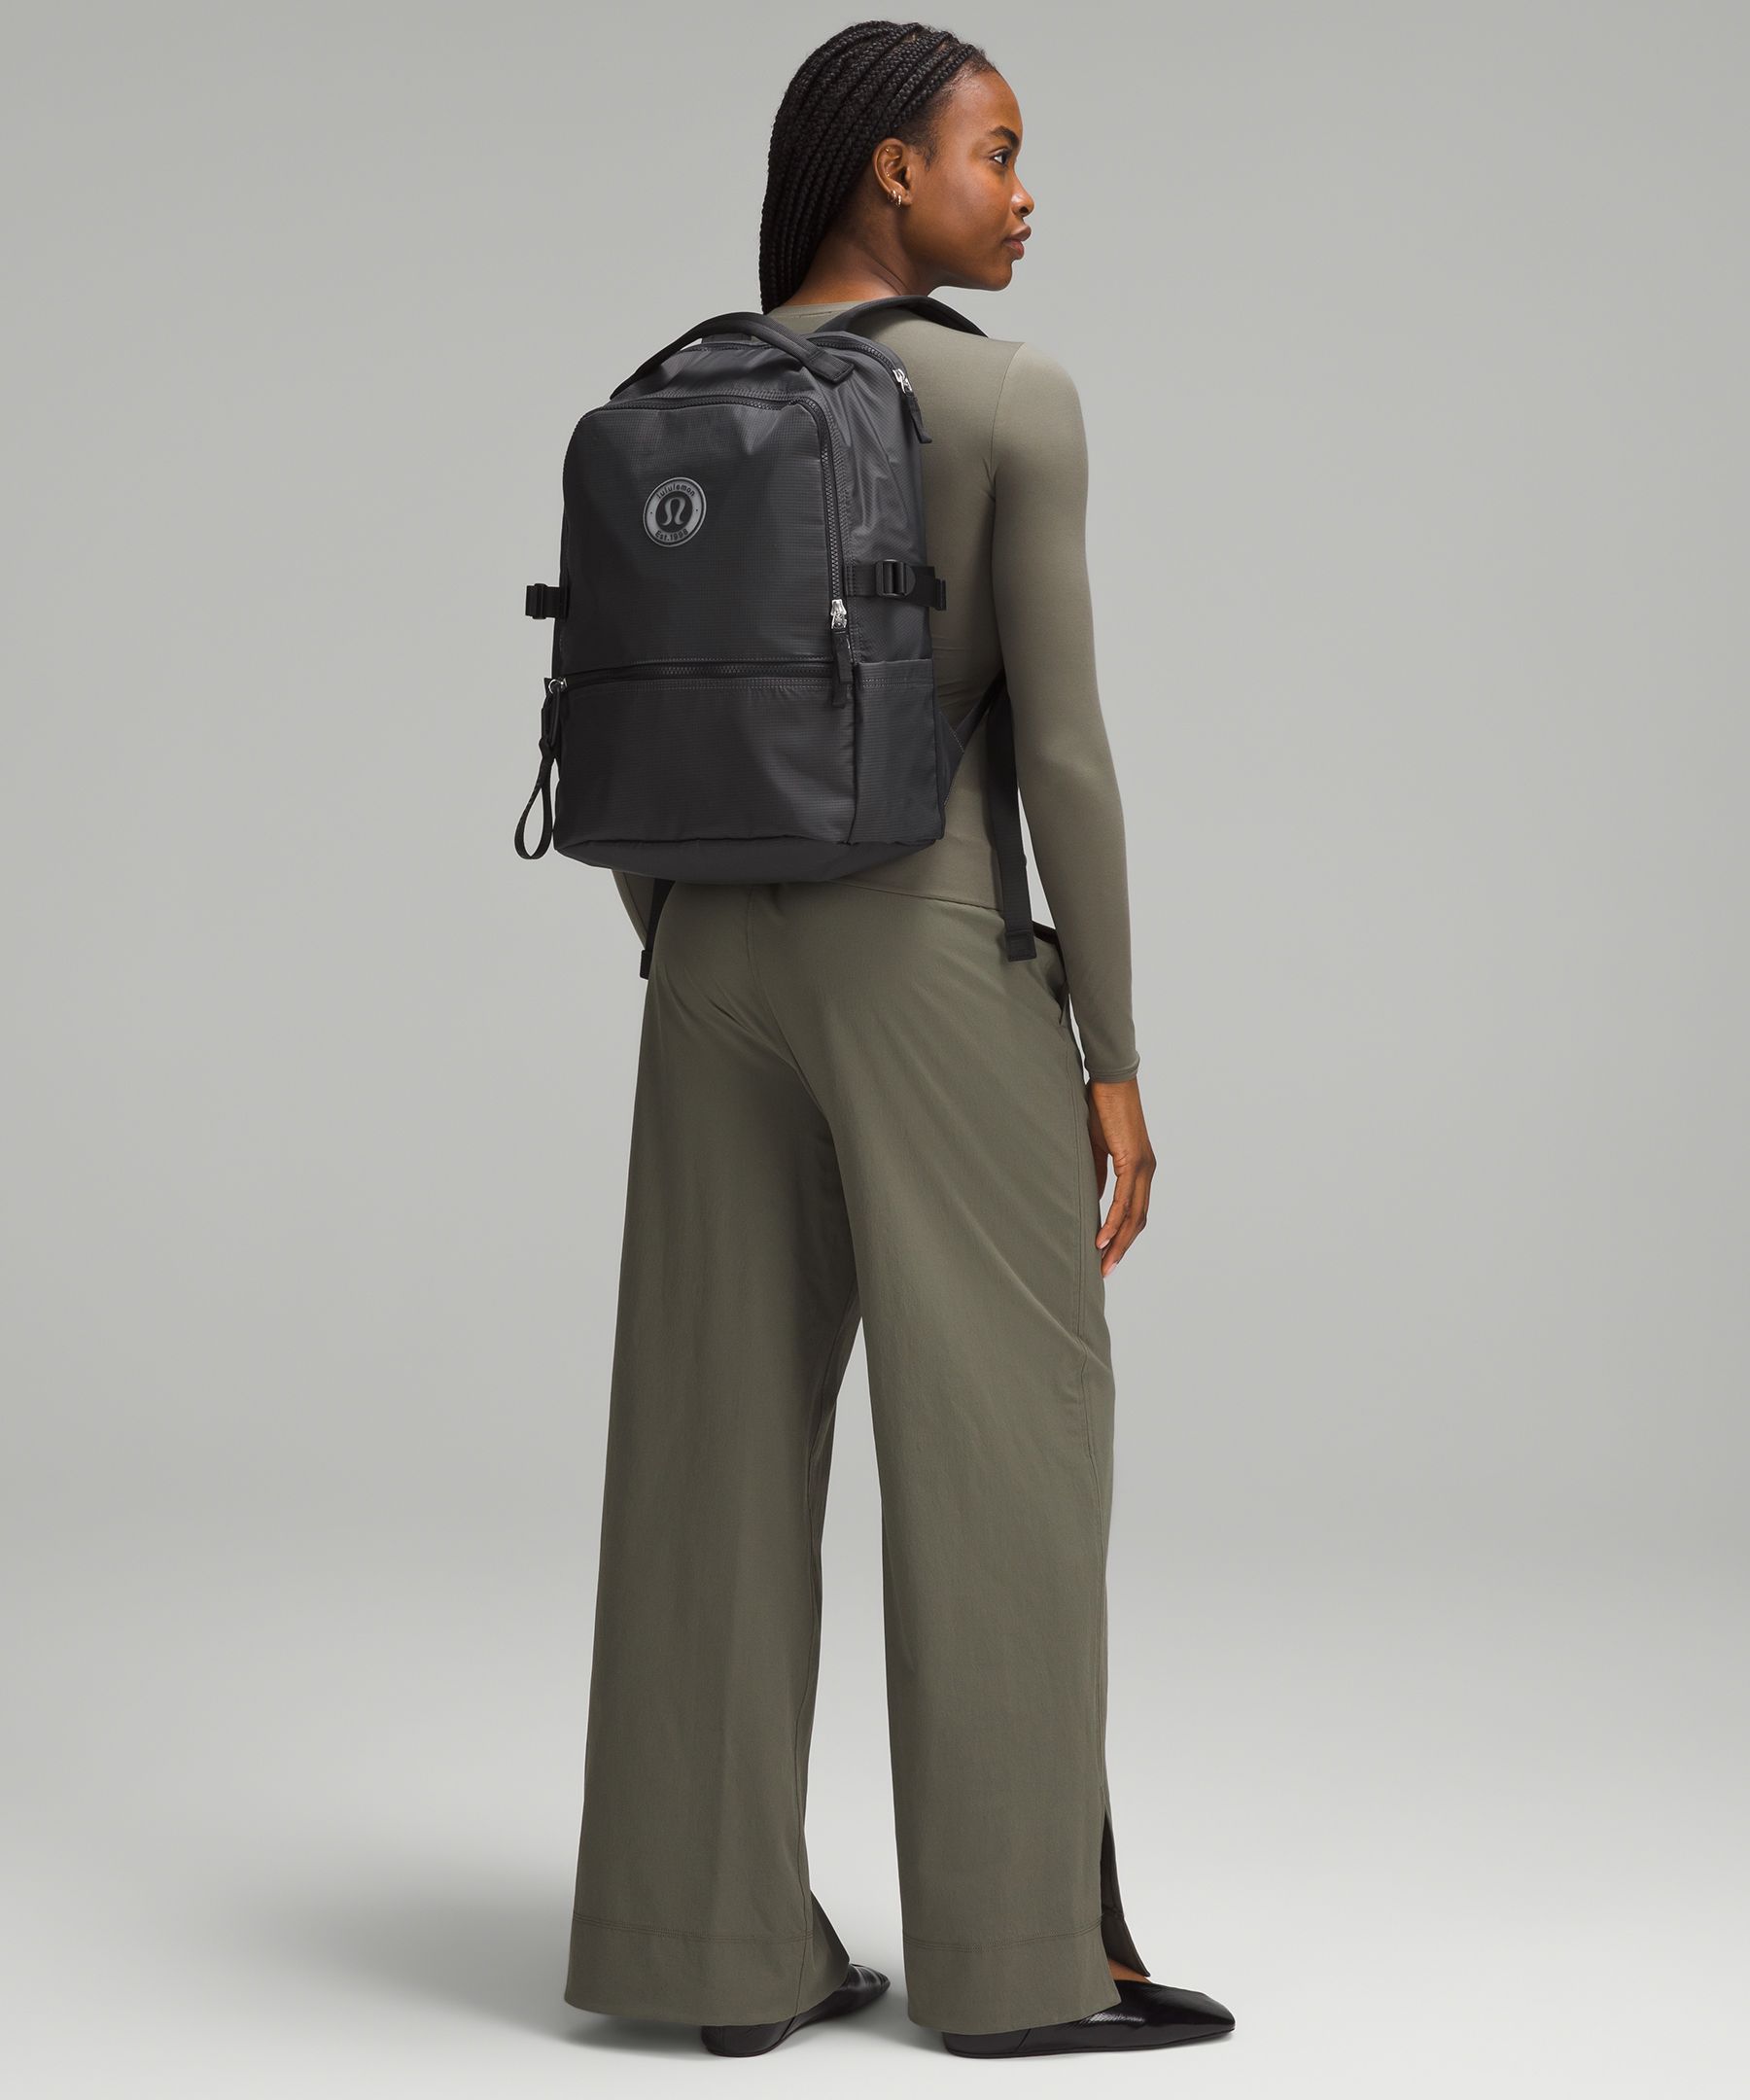 Shop Lululemon Backpack With Laptop Compartment - New Crew 22l